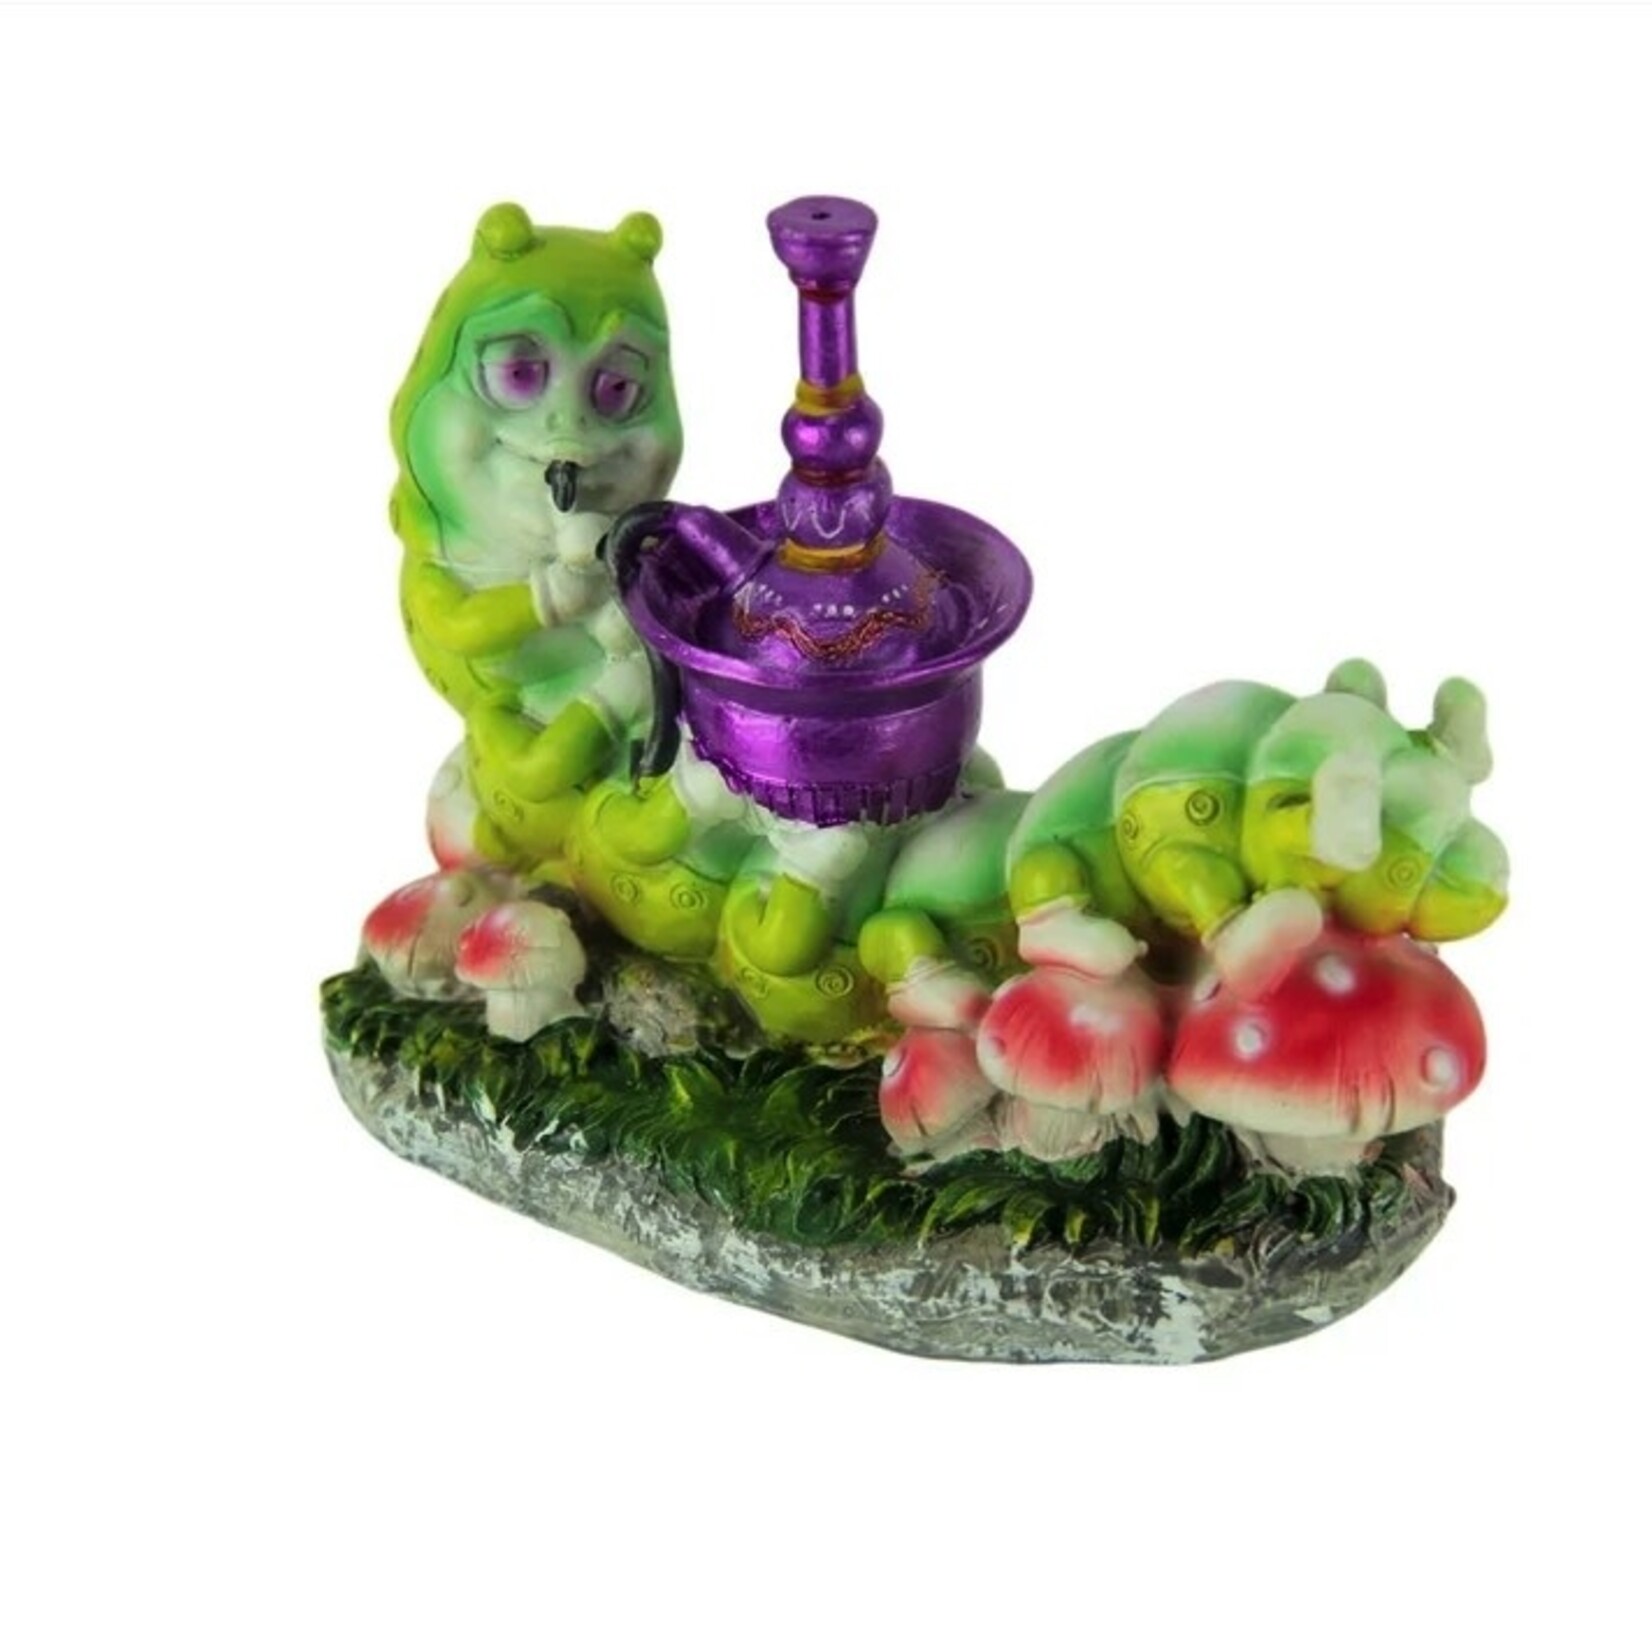 FANTASY GIFTS Incense holder Caterpillar Stand Upright